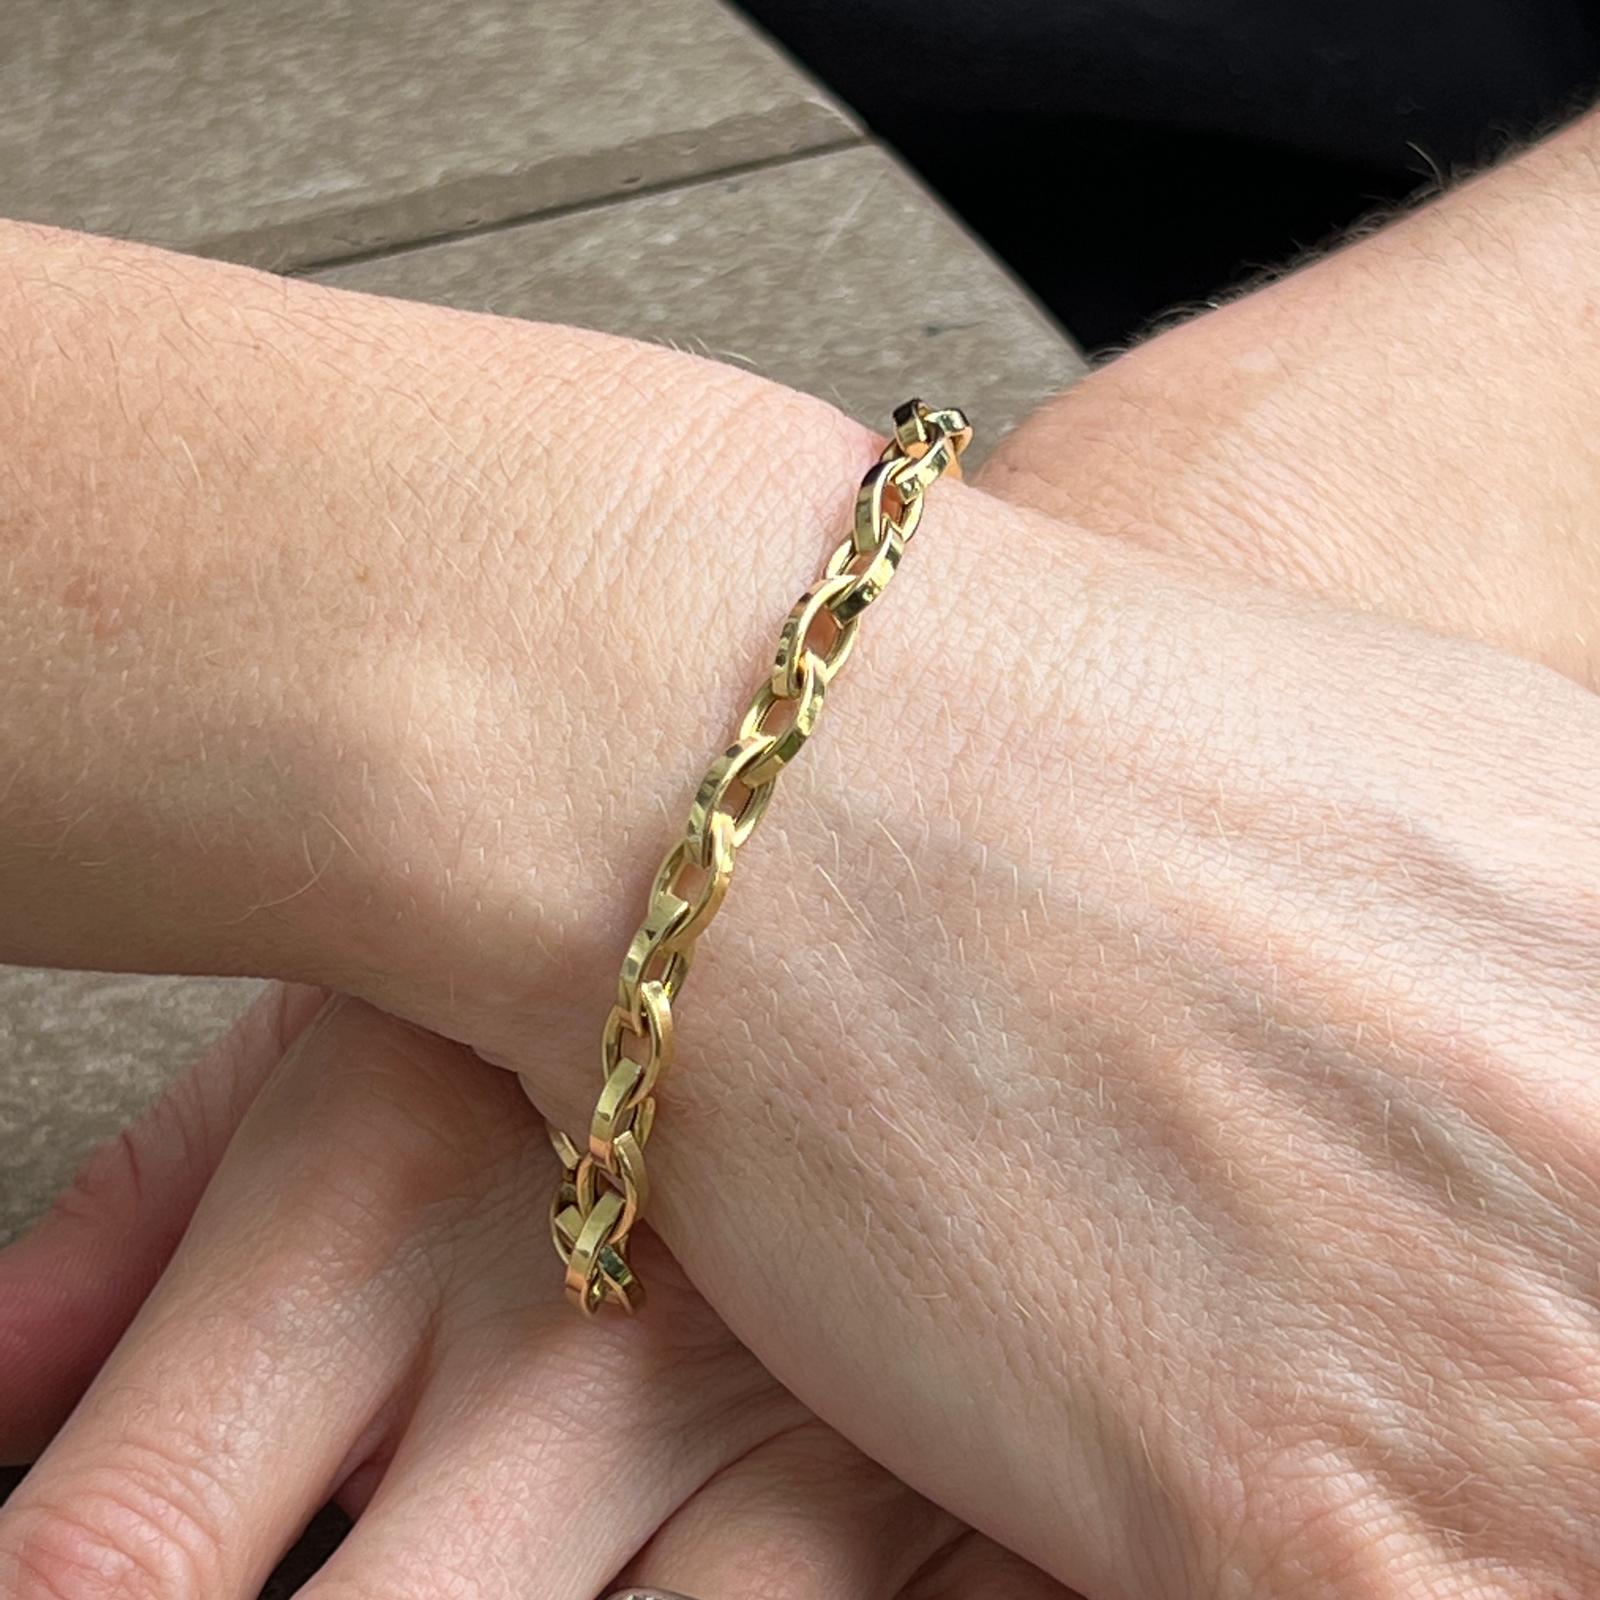 Roberto Coin Almond Link bracelet fashioned in 18 karat yellow gold. The bracelet features almond shape links, and measures 7 inches in length. The ruby hallmark is on the clasp. This is a current piece from Roberto Coin. 

MSRP: $1,480.00